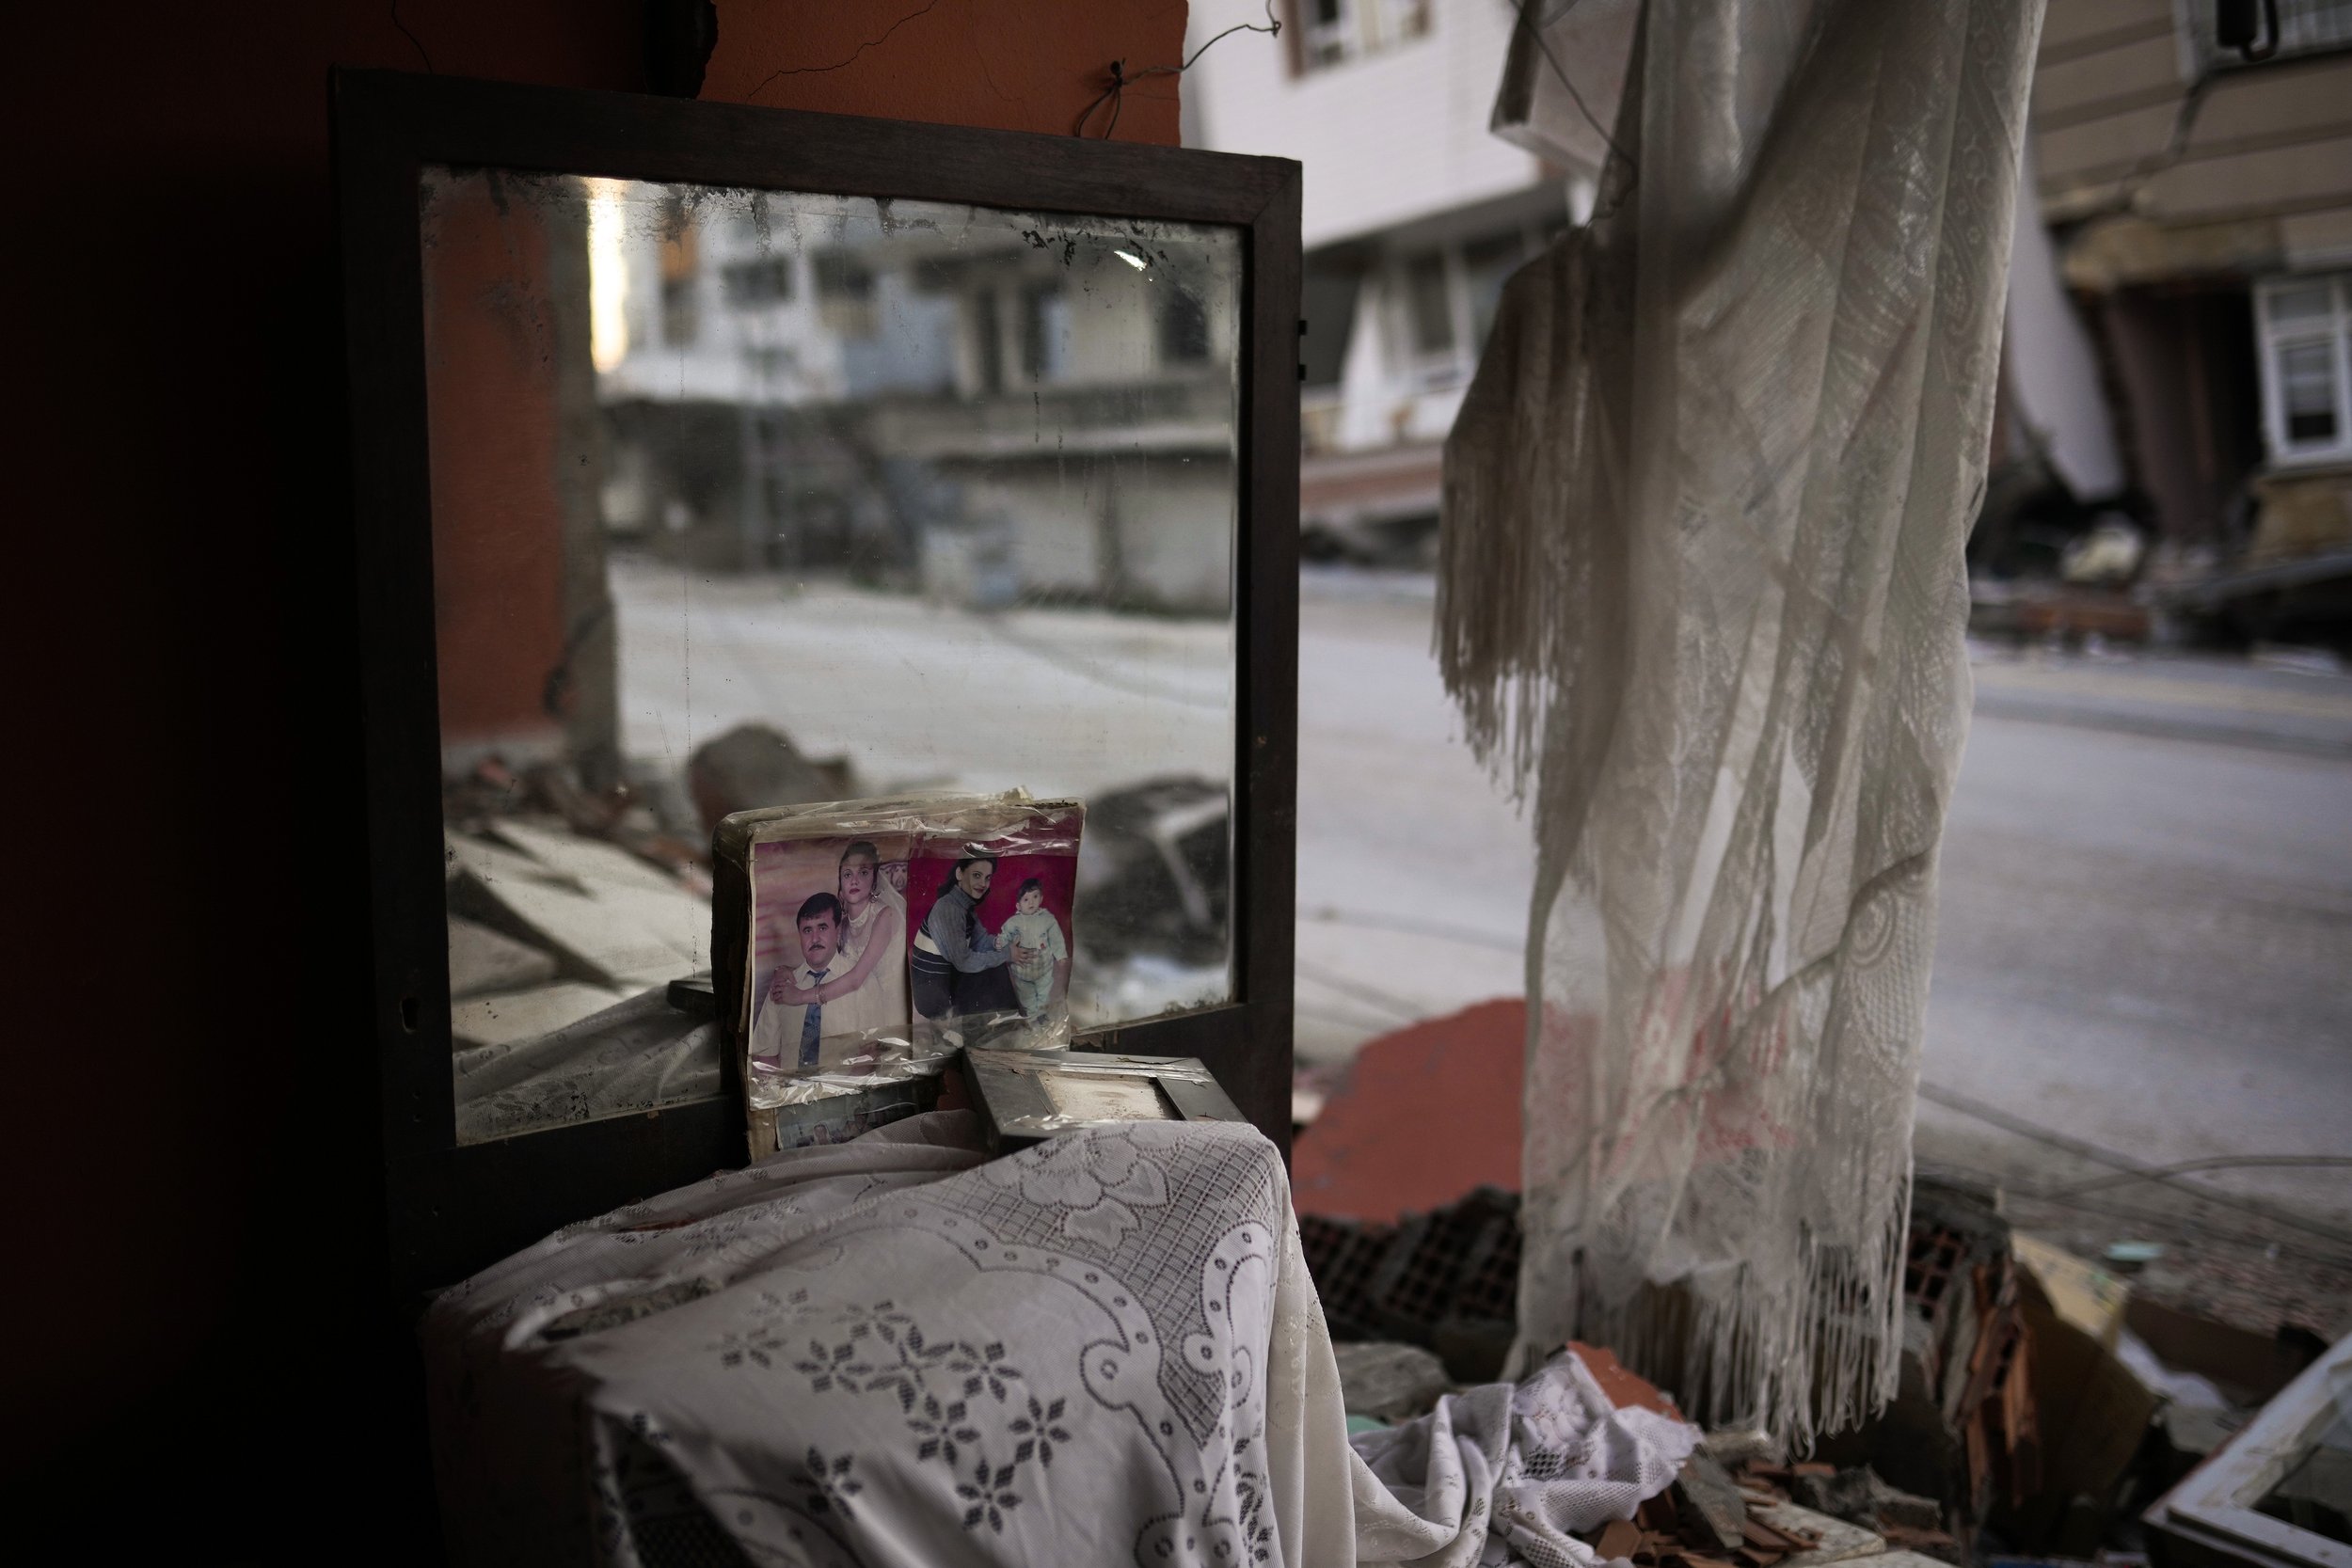  Photographs lie next to a mirror in the room of a destroyed house in Samandag, southern Turkey, on Feb. 16, 2023, after the earthquake struck the area. (AP Photo/Francisco Seco) 